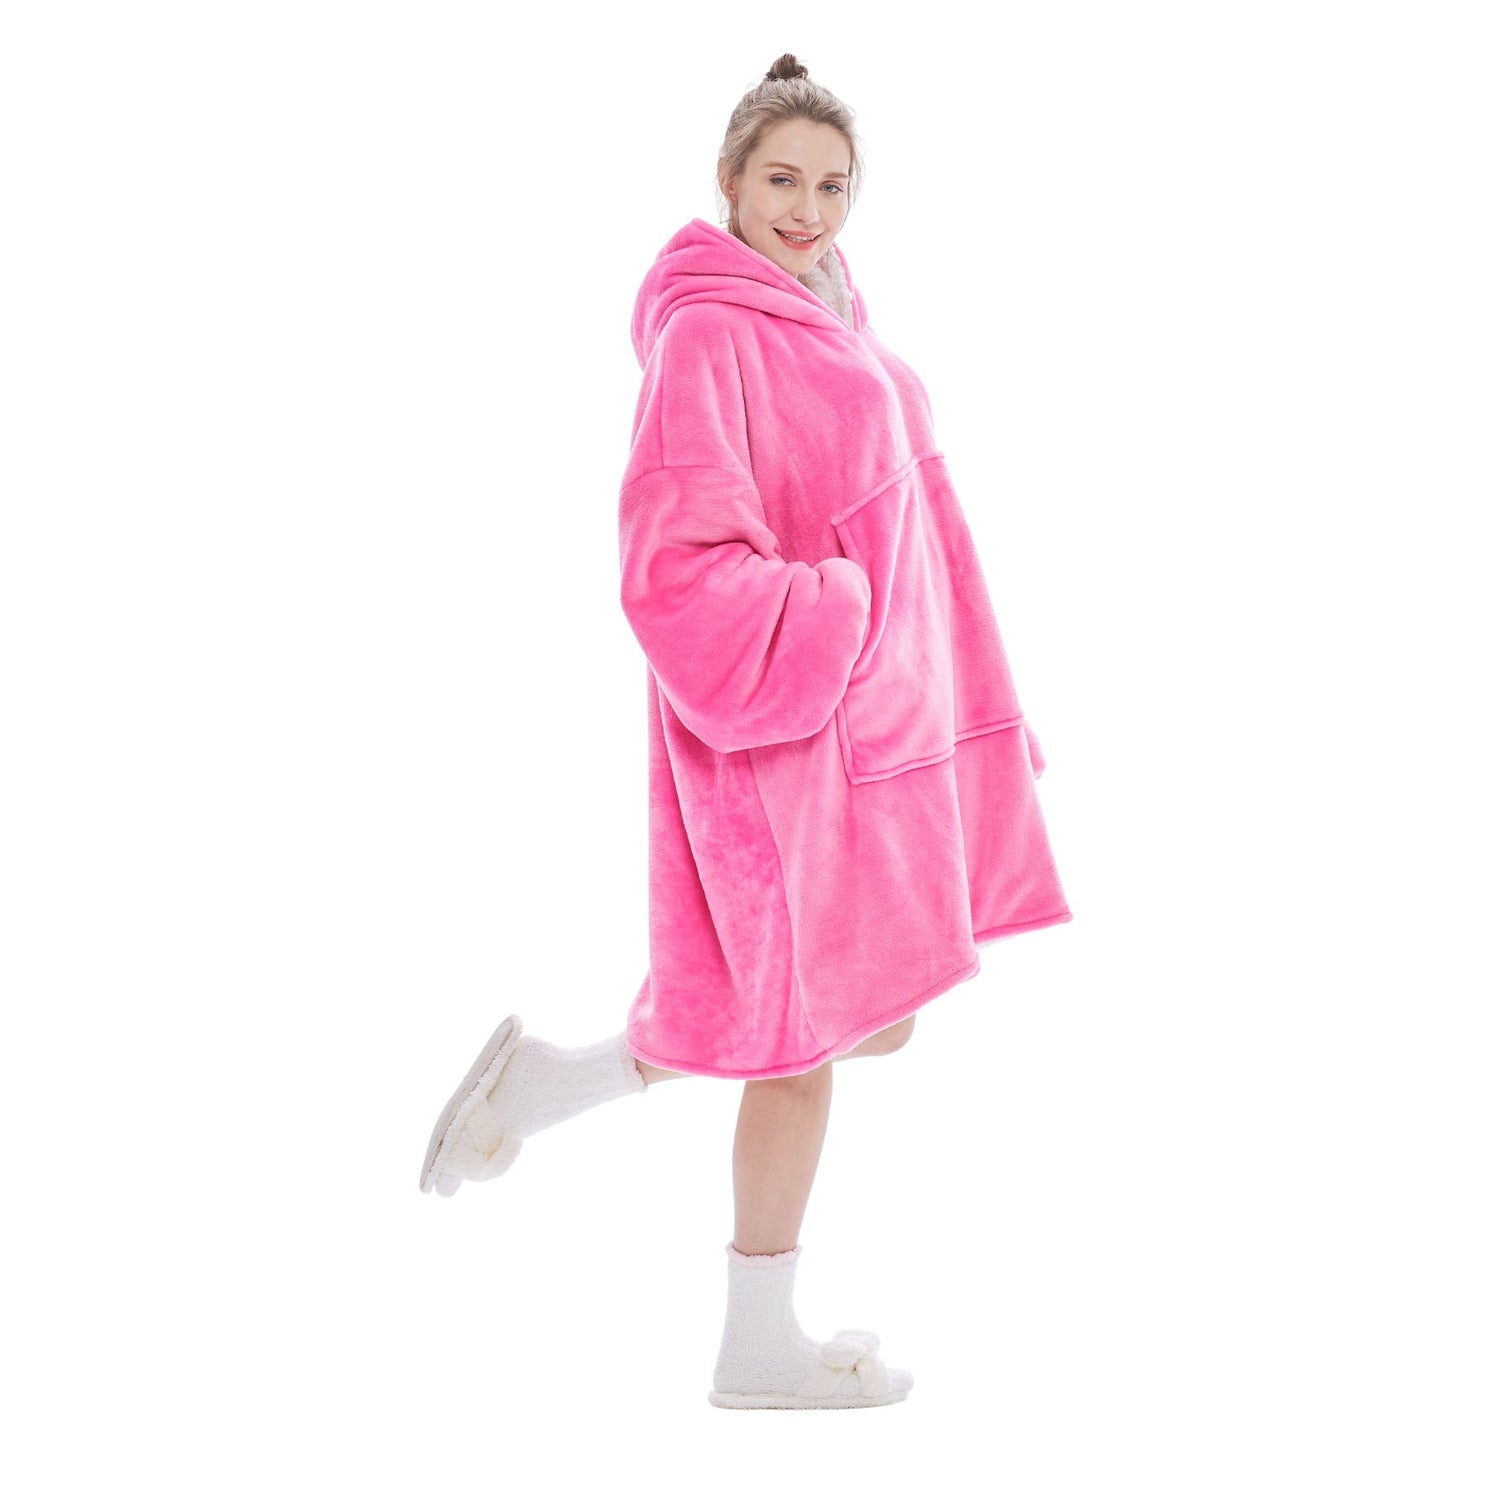 The Oversized Hoodie® fuchsia soft cosy comfy sweet 